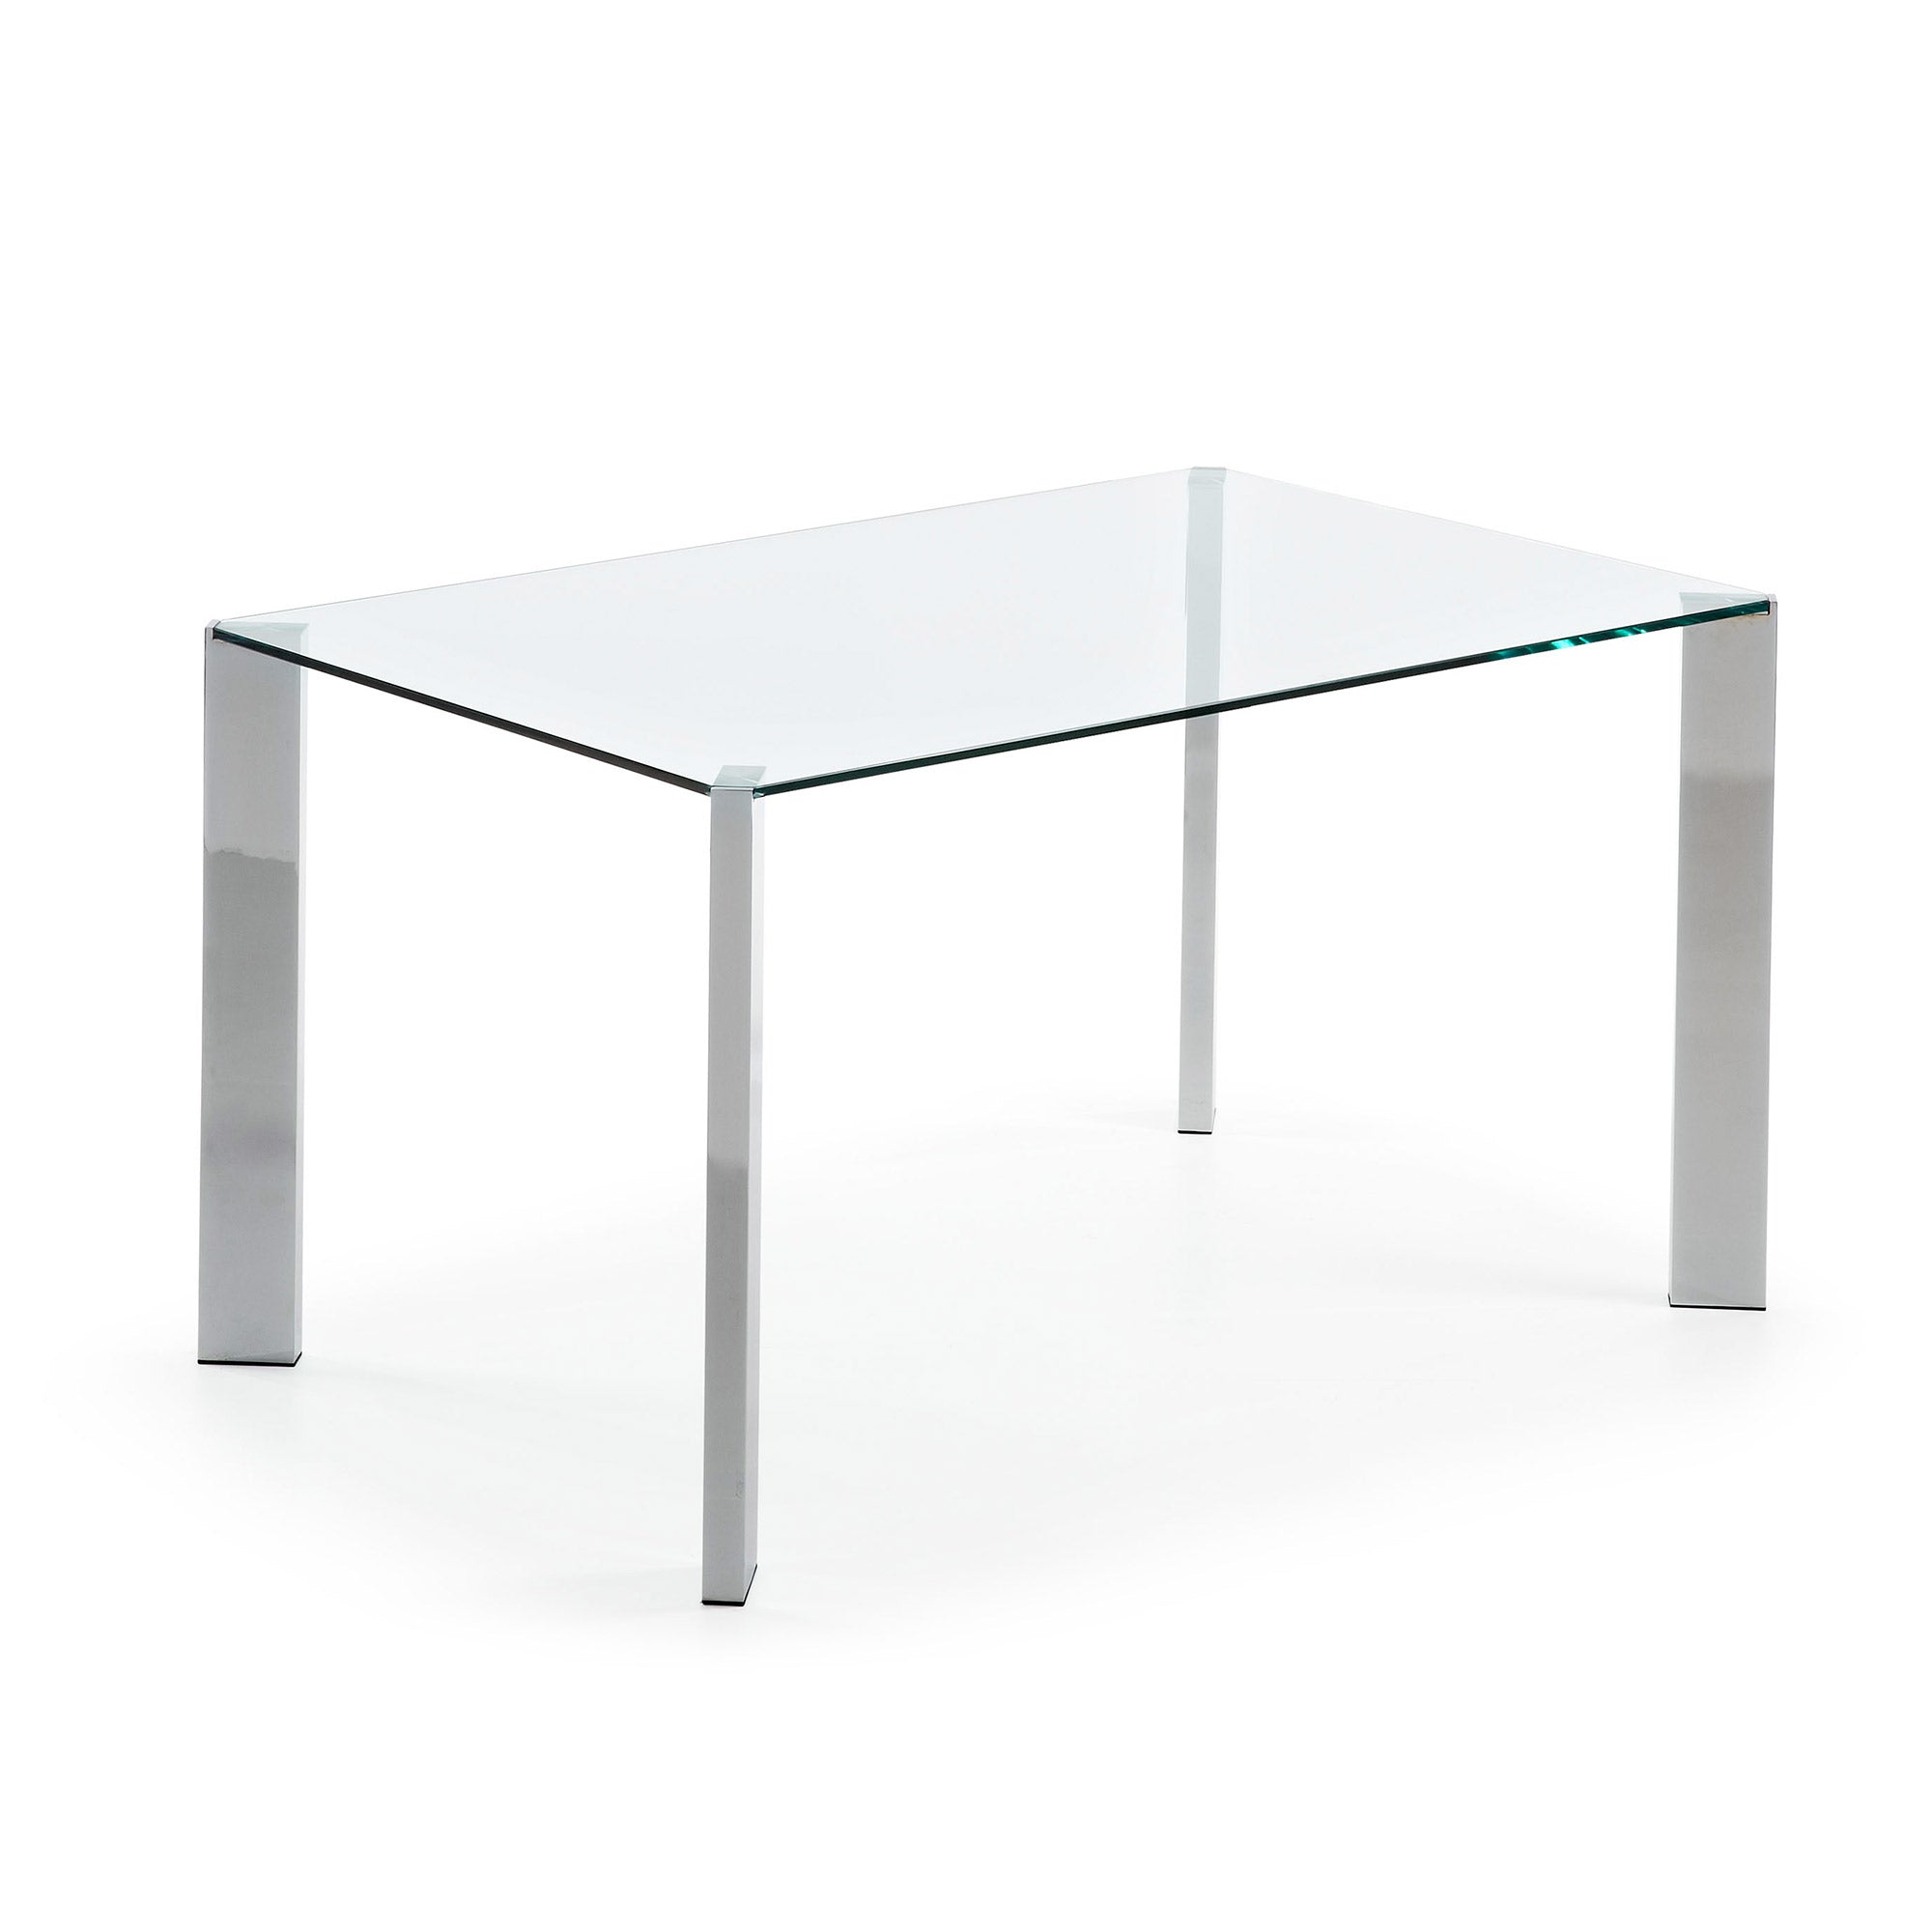 Spot glass table with steel legs and chrome finish 142 x 92 cm